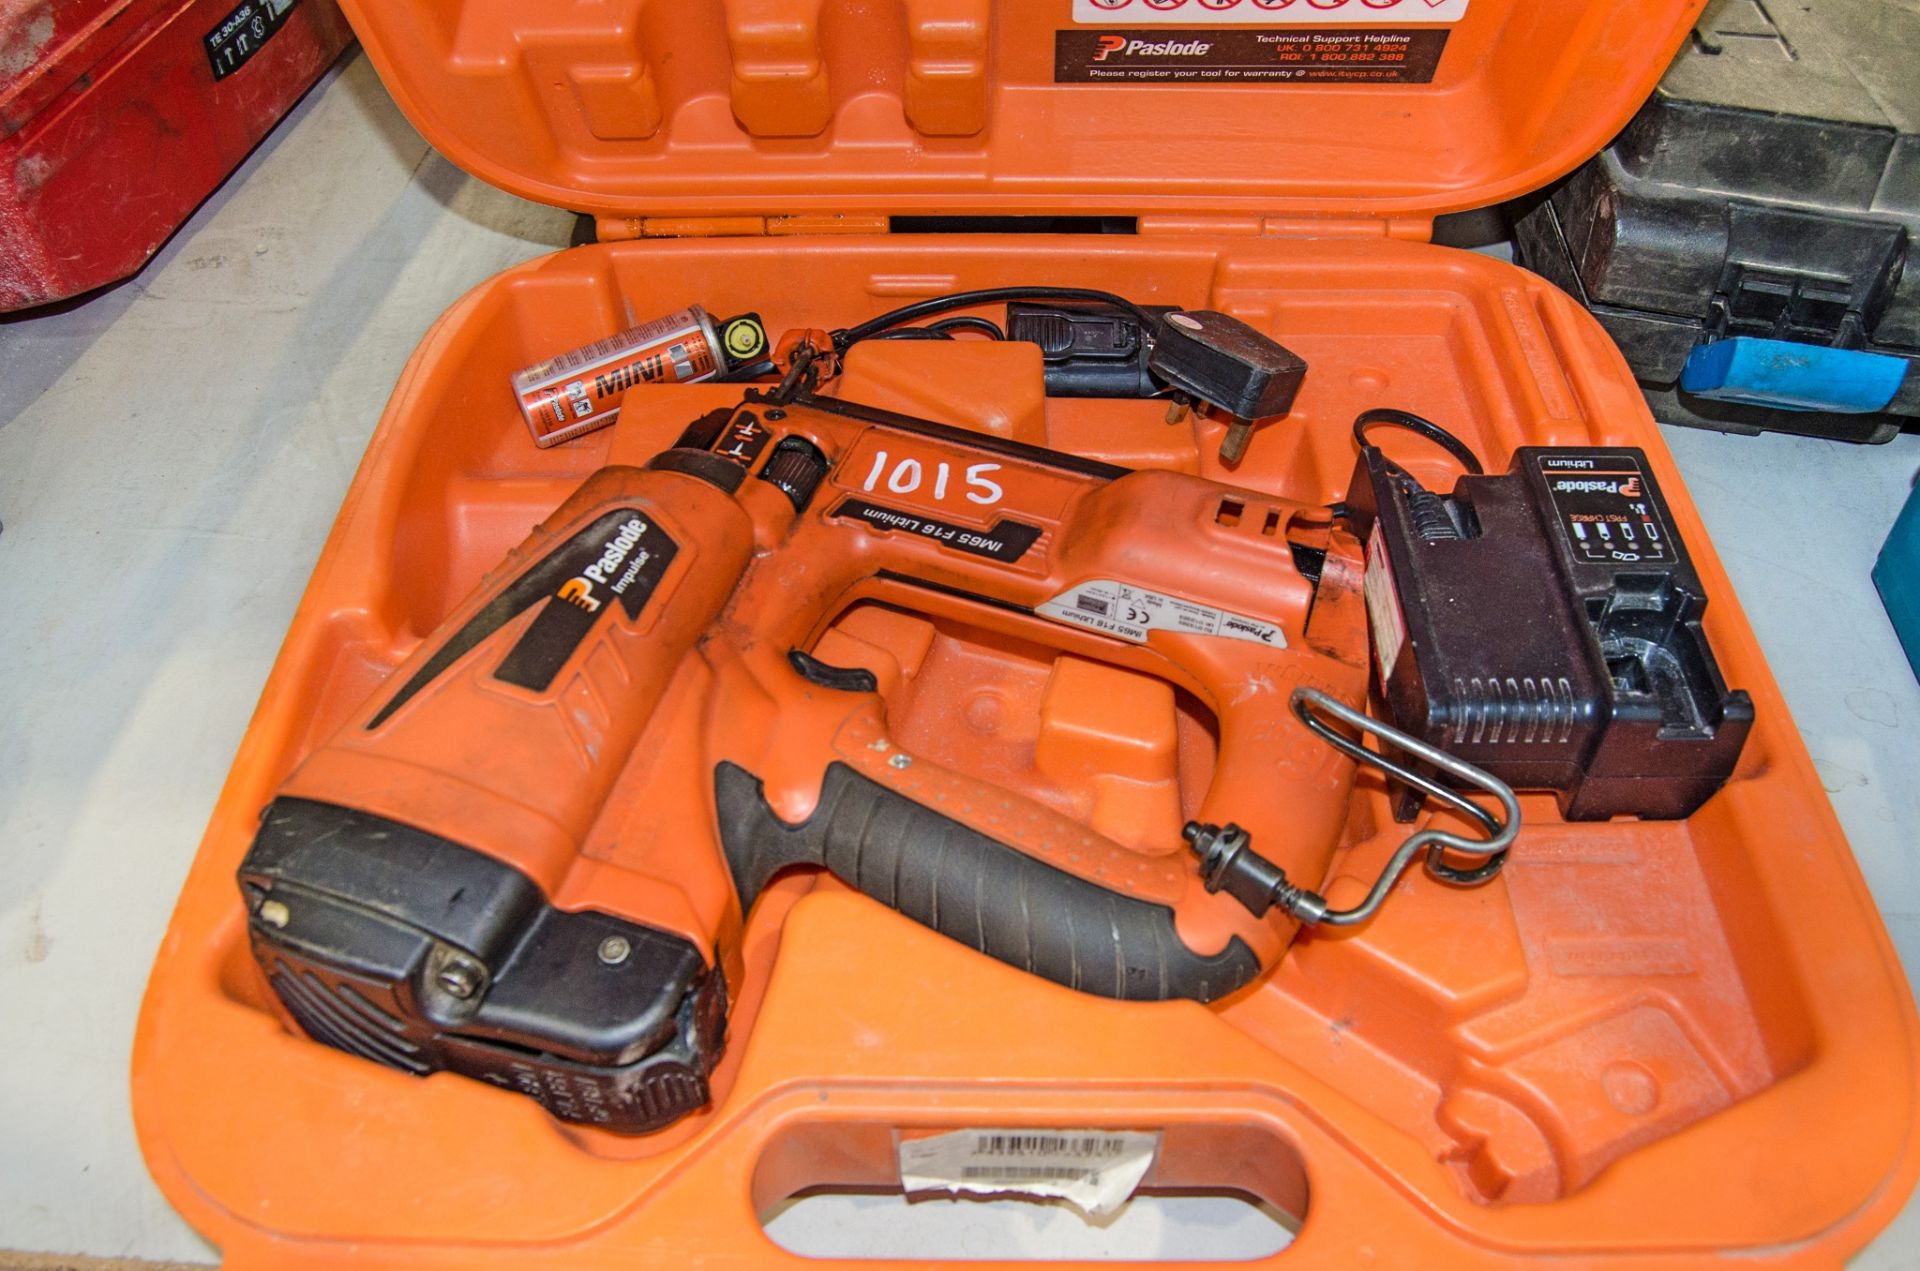 Paslode IM65 F16 Impulse cordless nail gun c/w battery, charger and carry case A984338